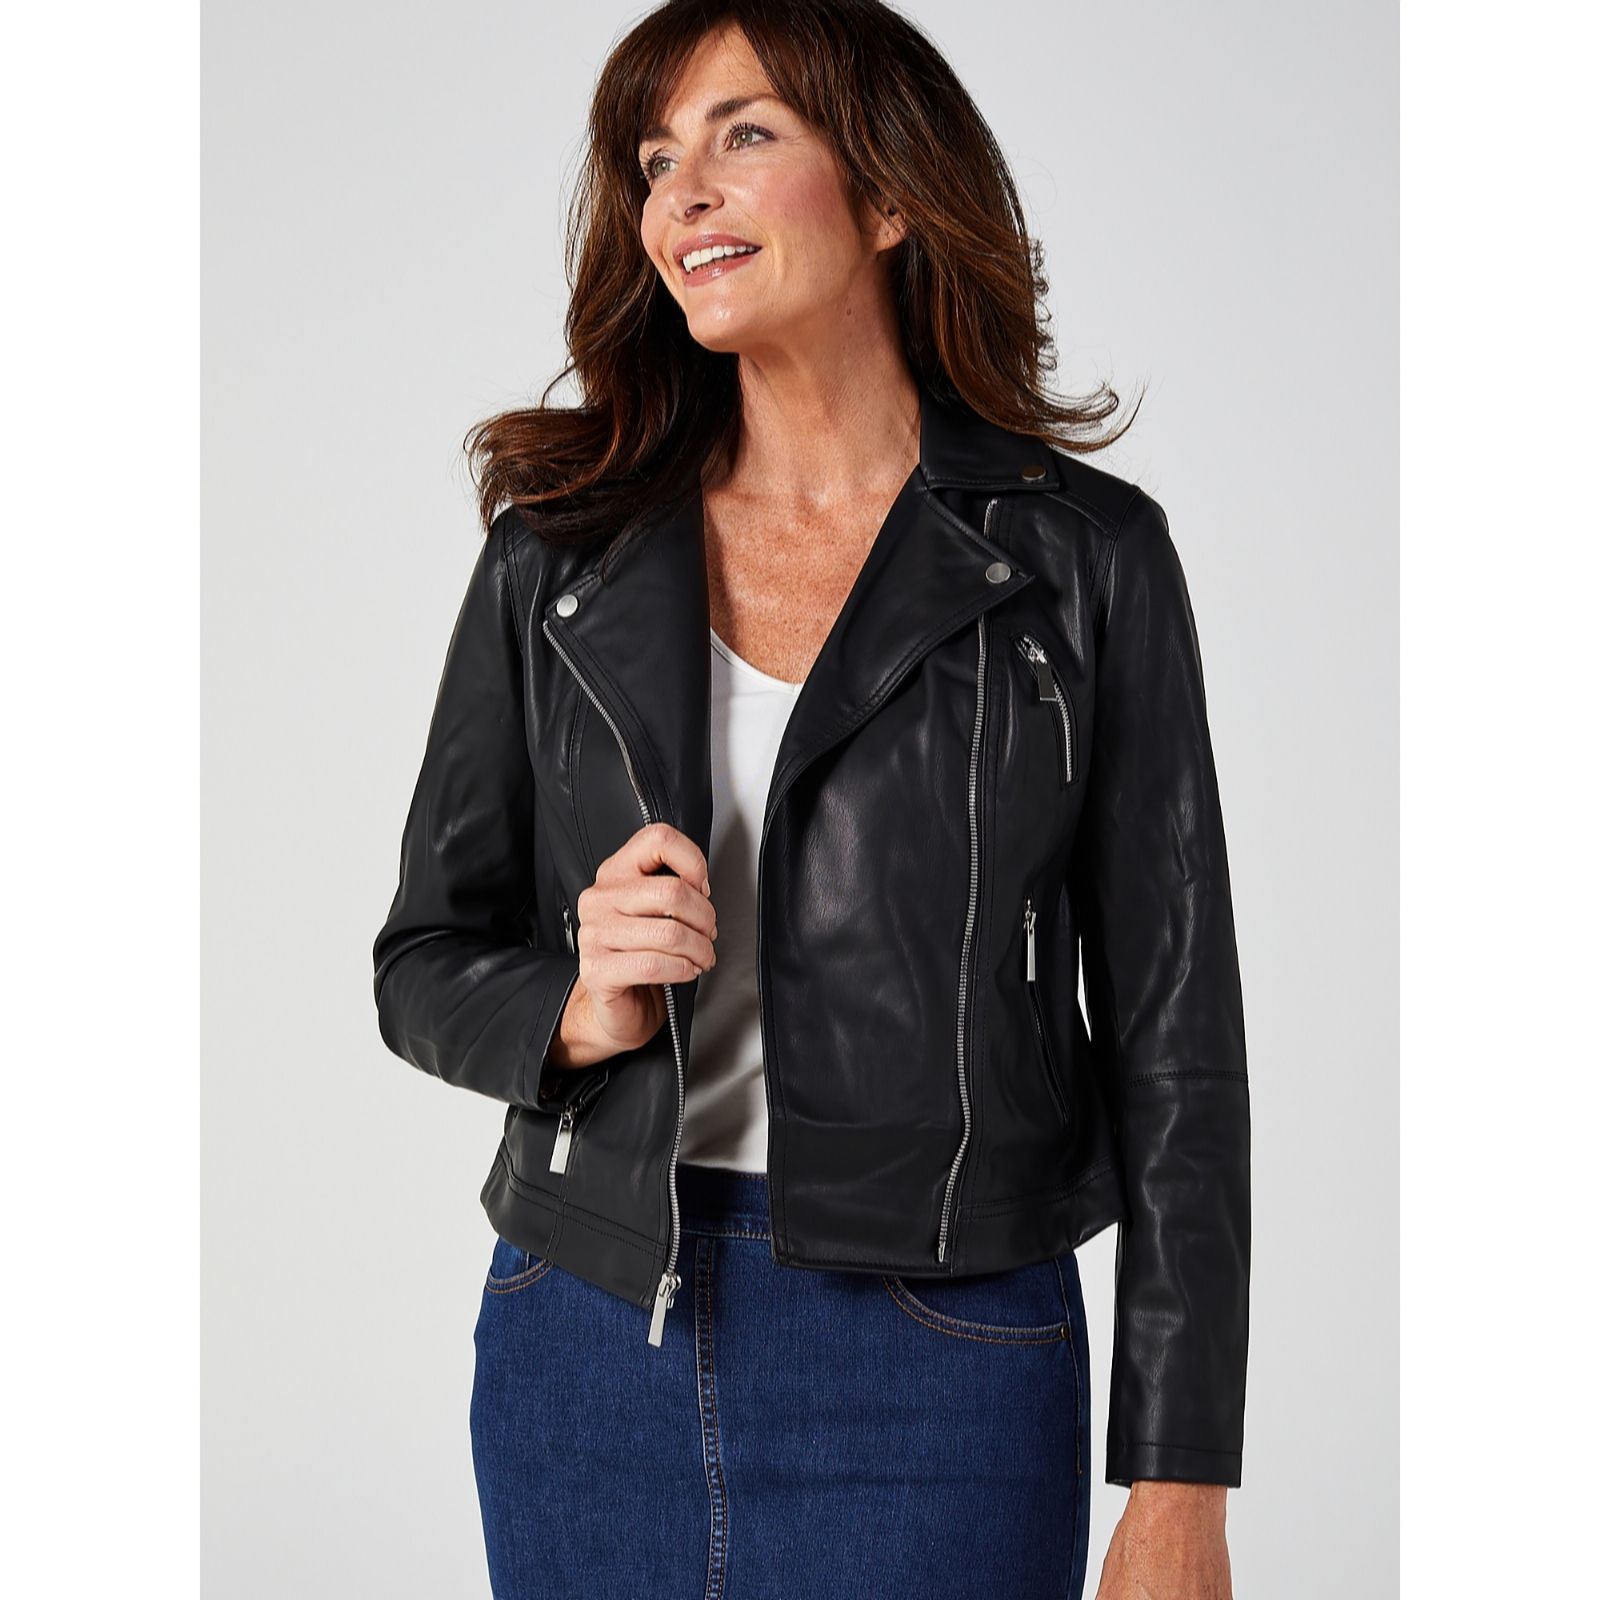 Ruth Langsford Faux Leather Biker Jacket